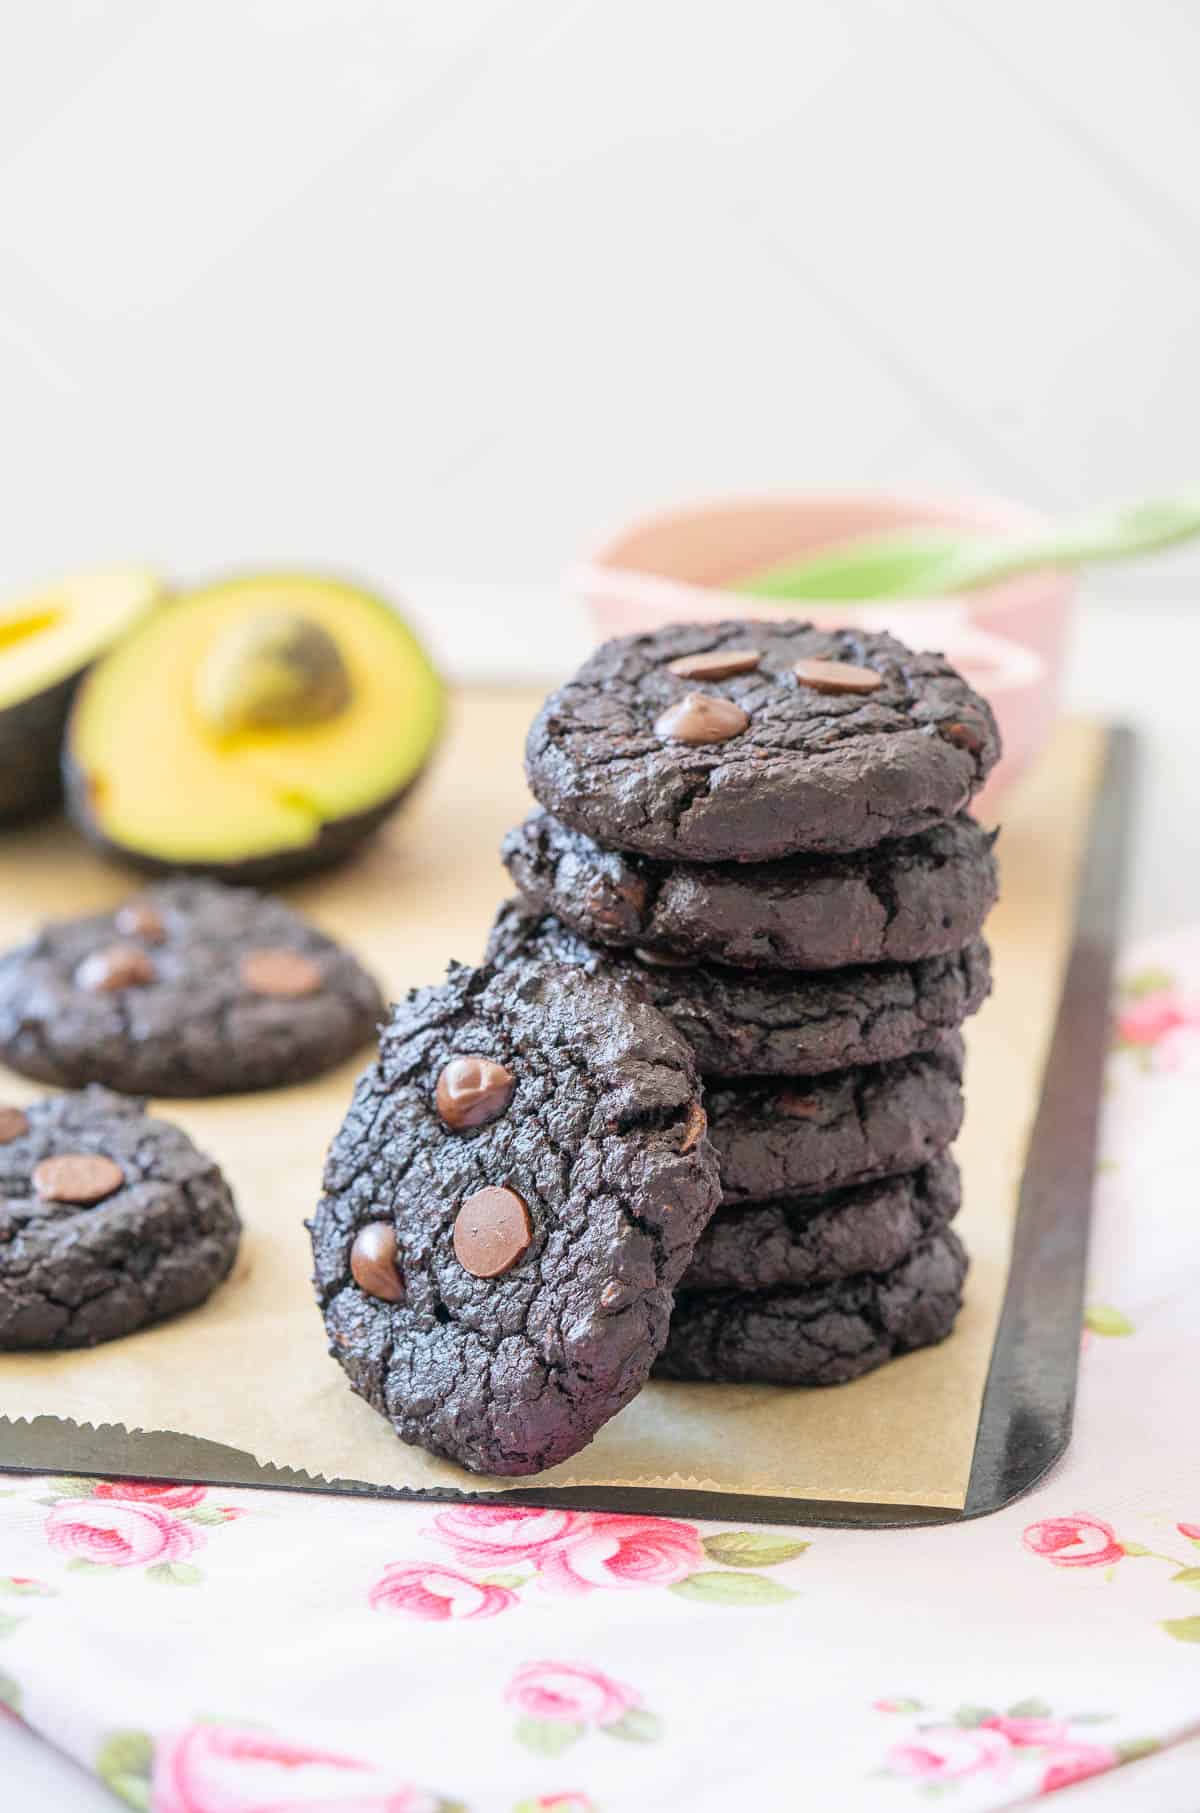 A stack of 7 chocolate cookies on a pink floral tea towel with an avocado in the background